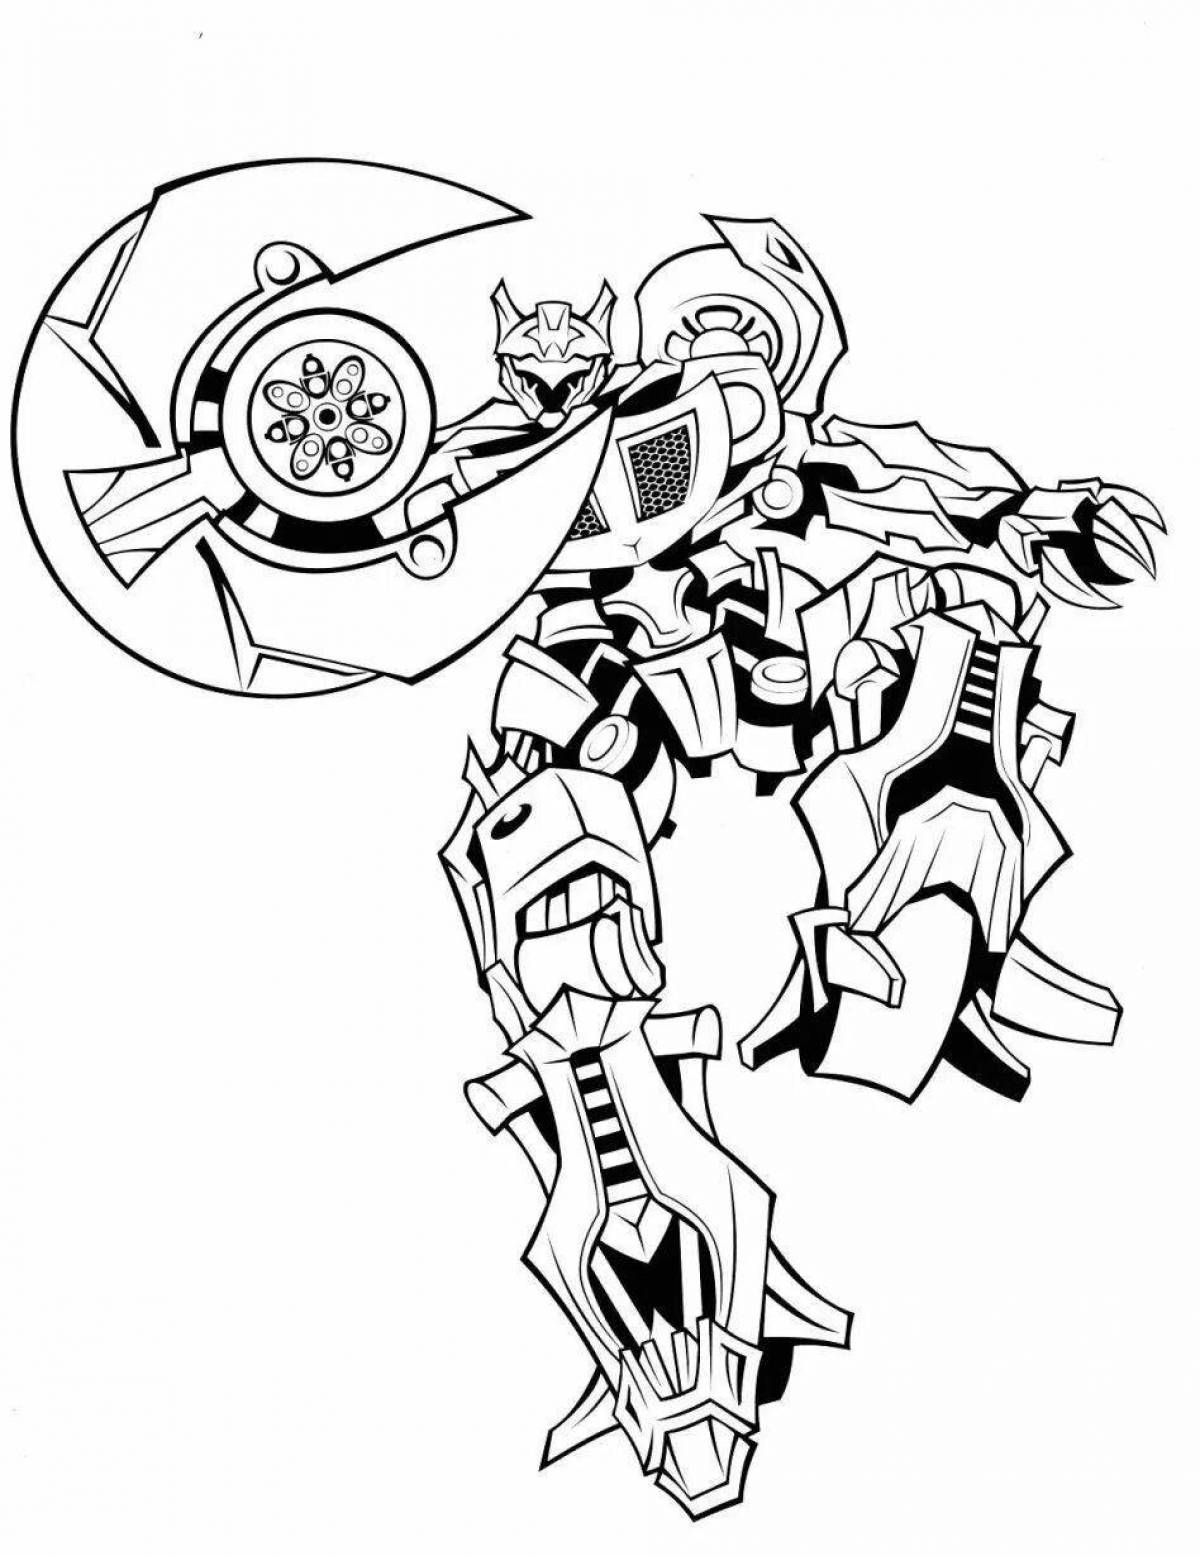 Colorful barricade coloring page